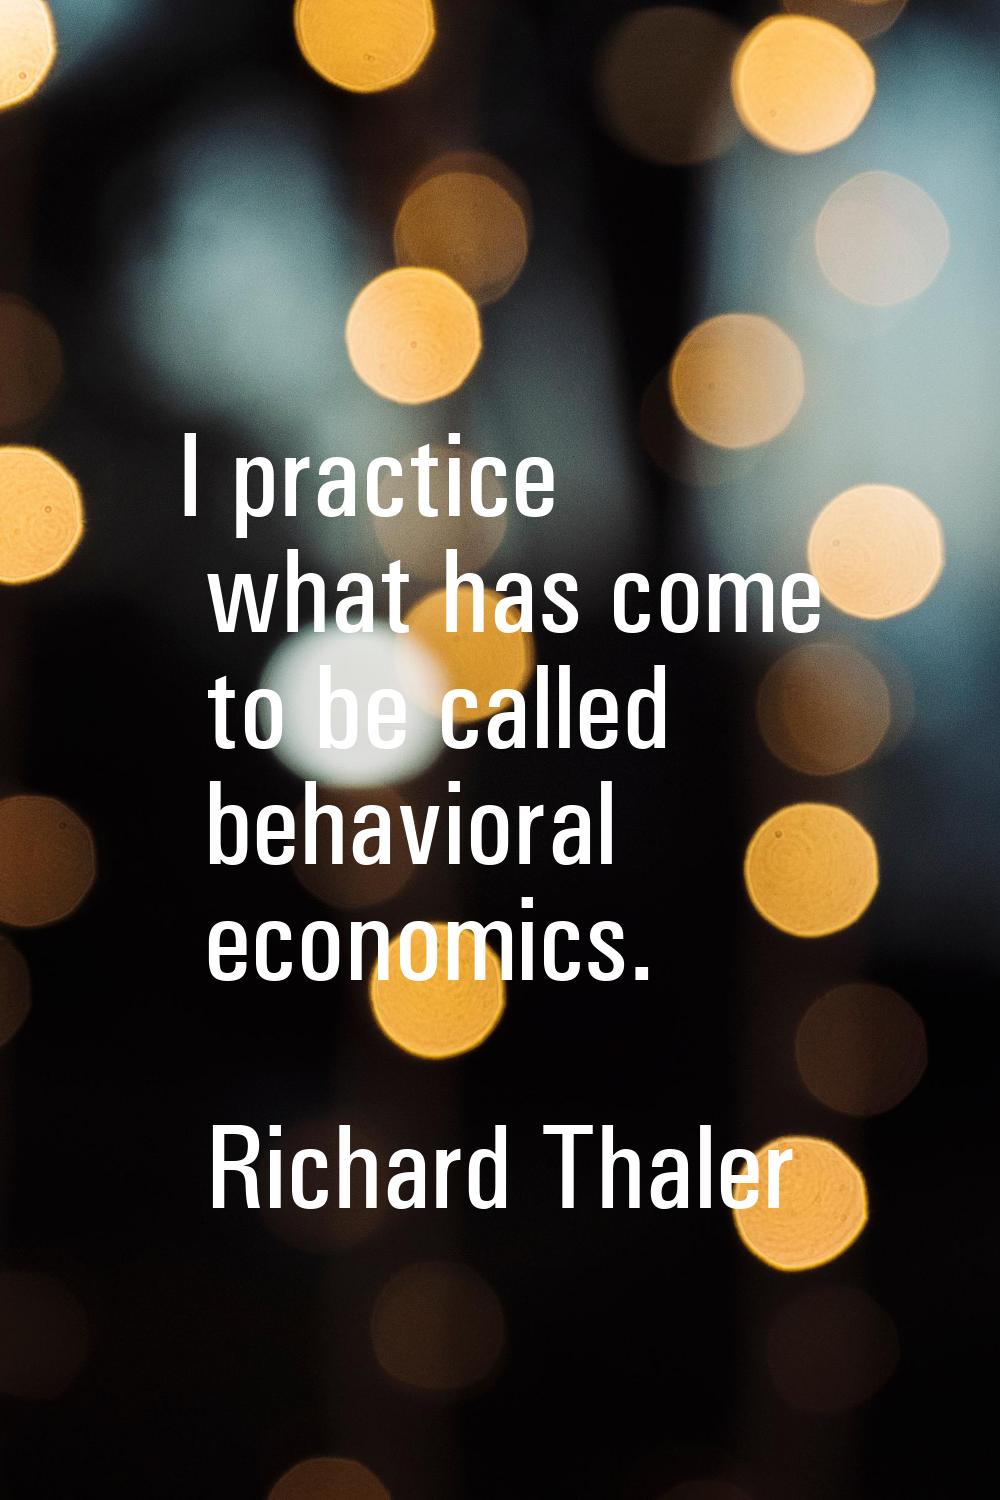 I practice what has come to be called behavioral economics.